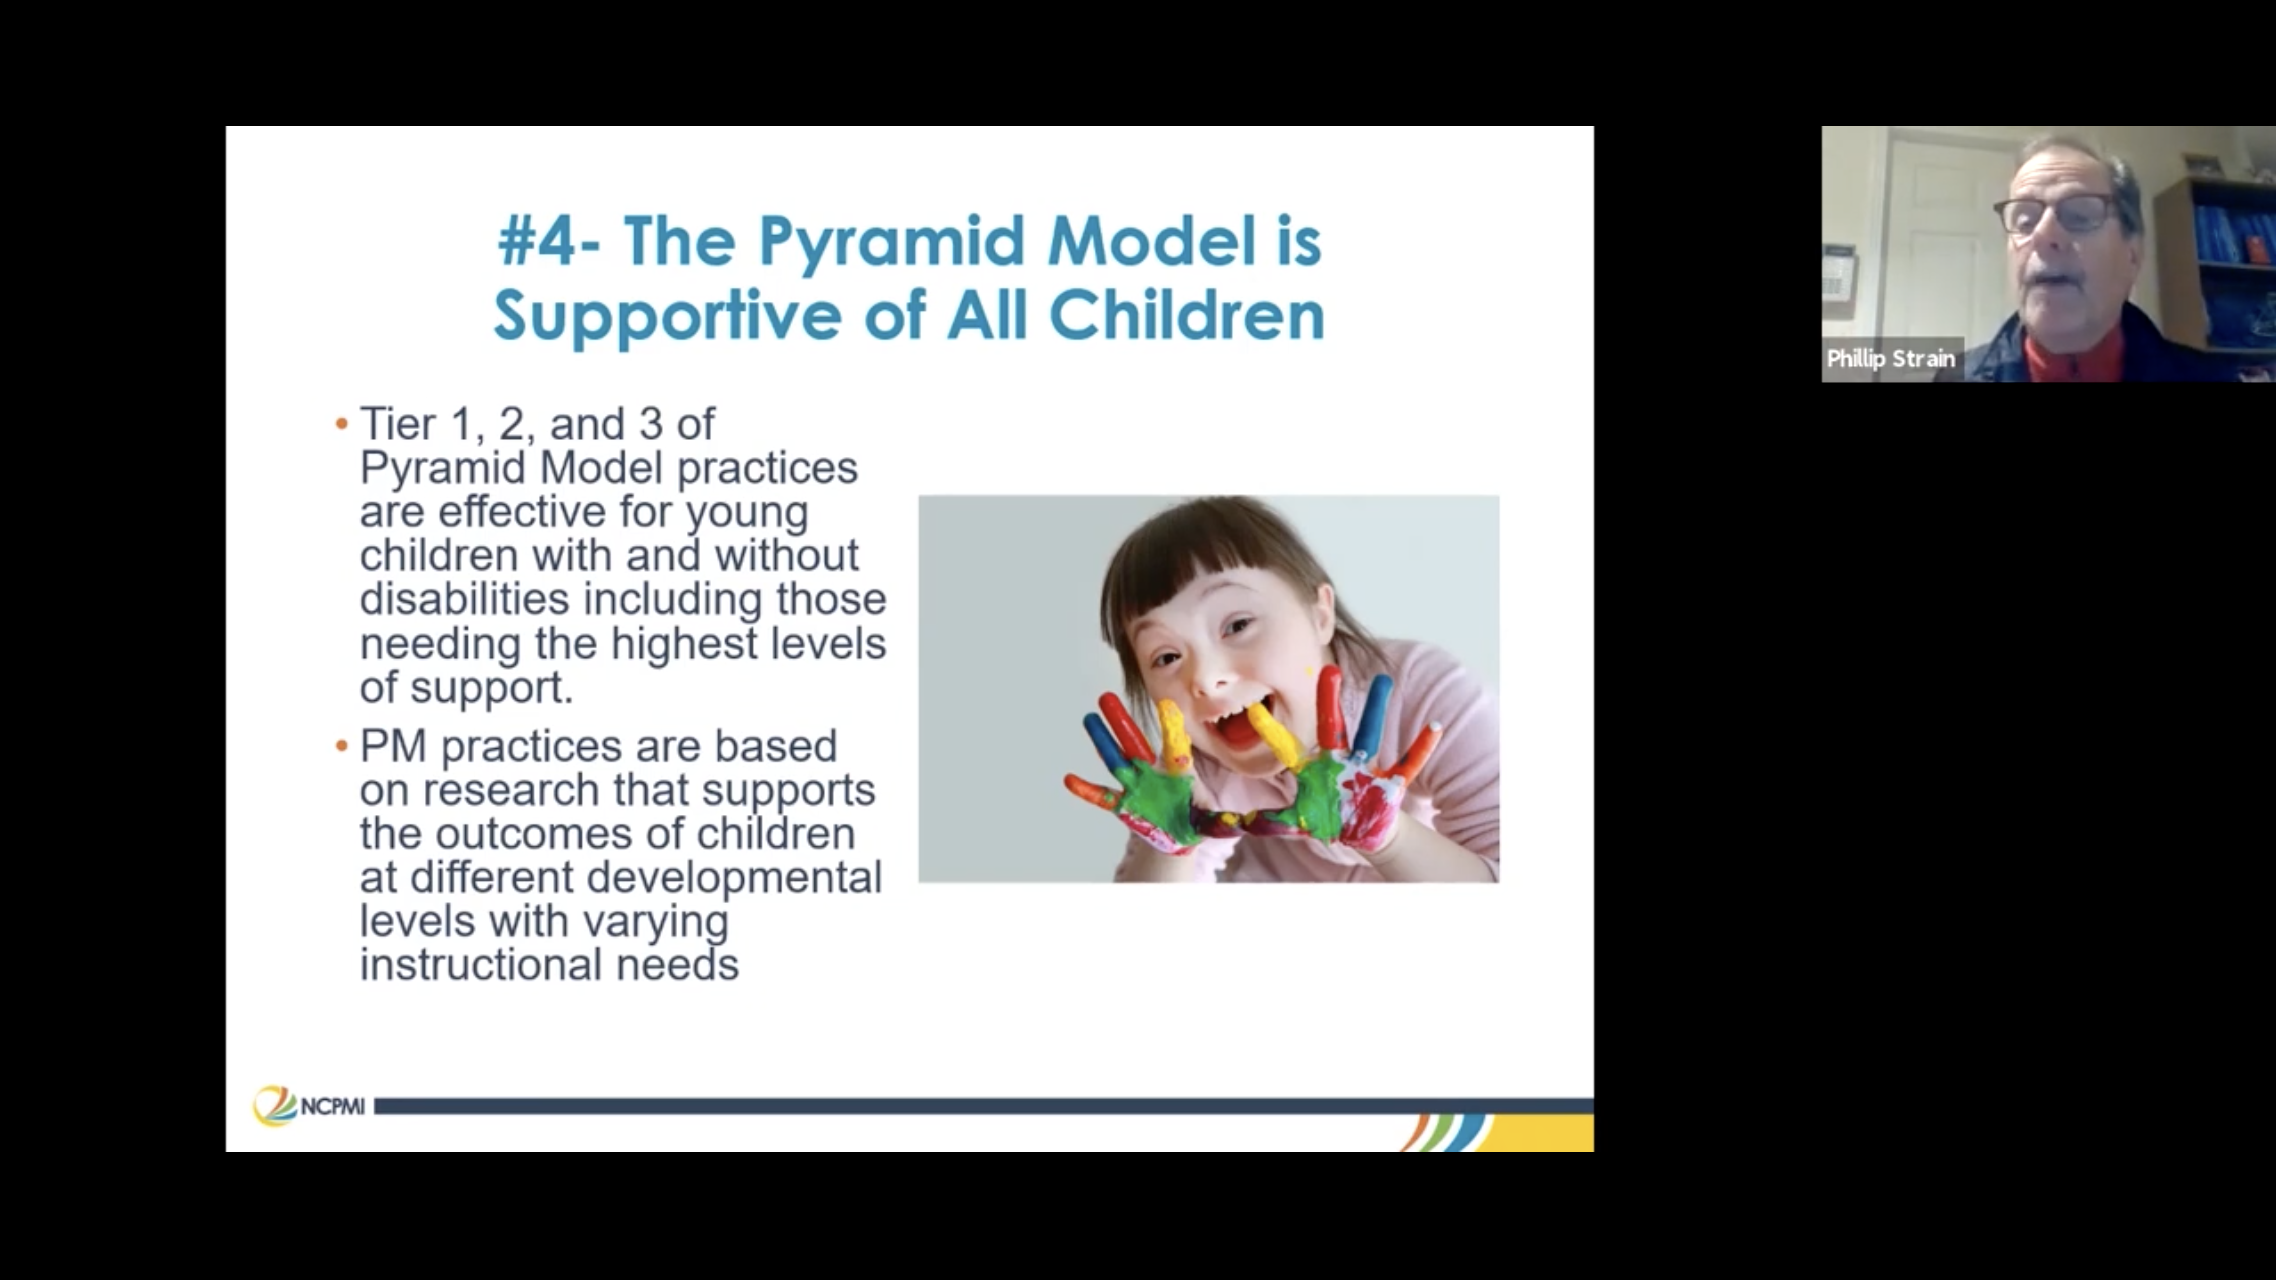 Experiencing Inclusion Through Pyramid Model: New Resources from NCPMI